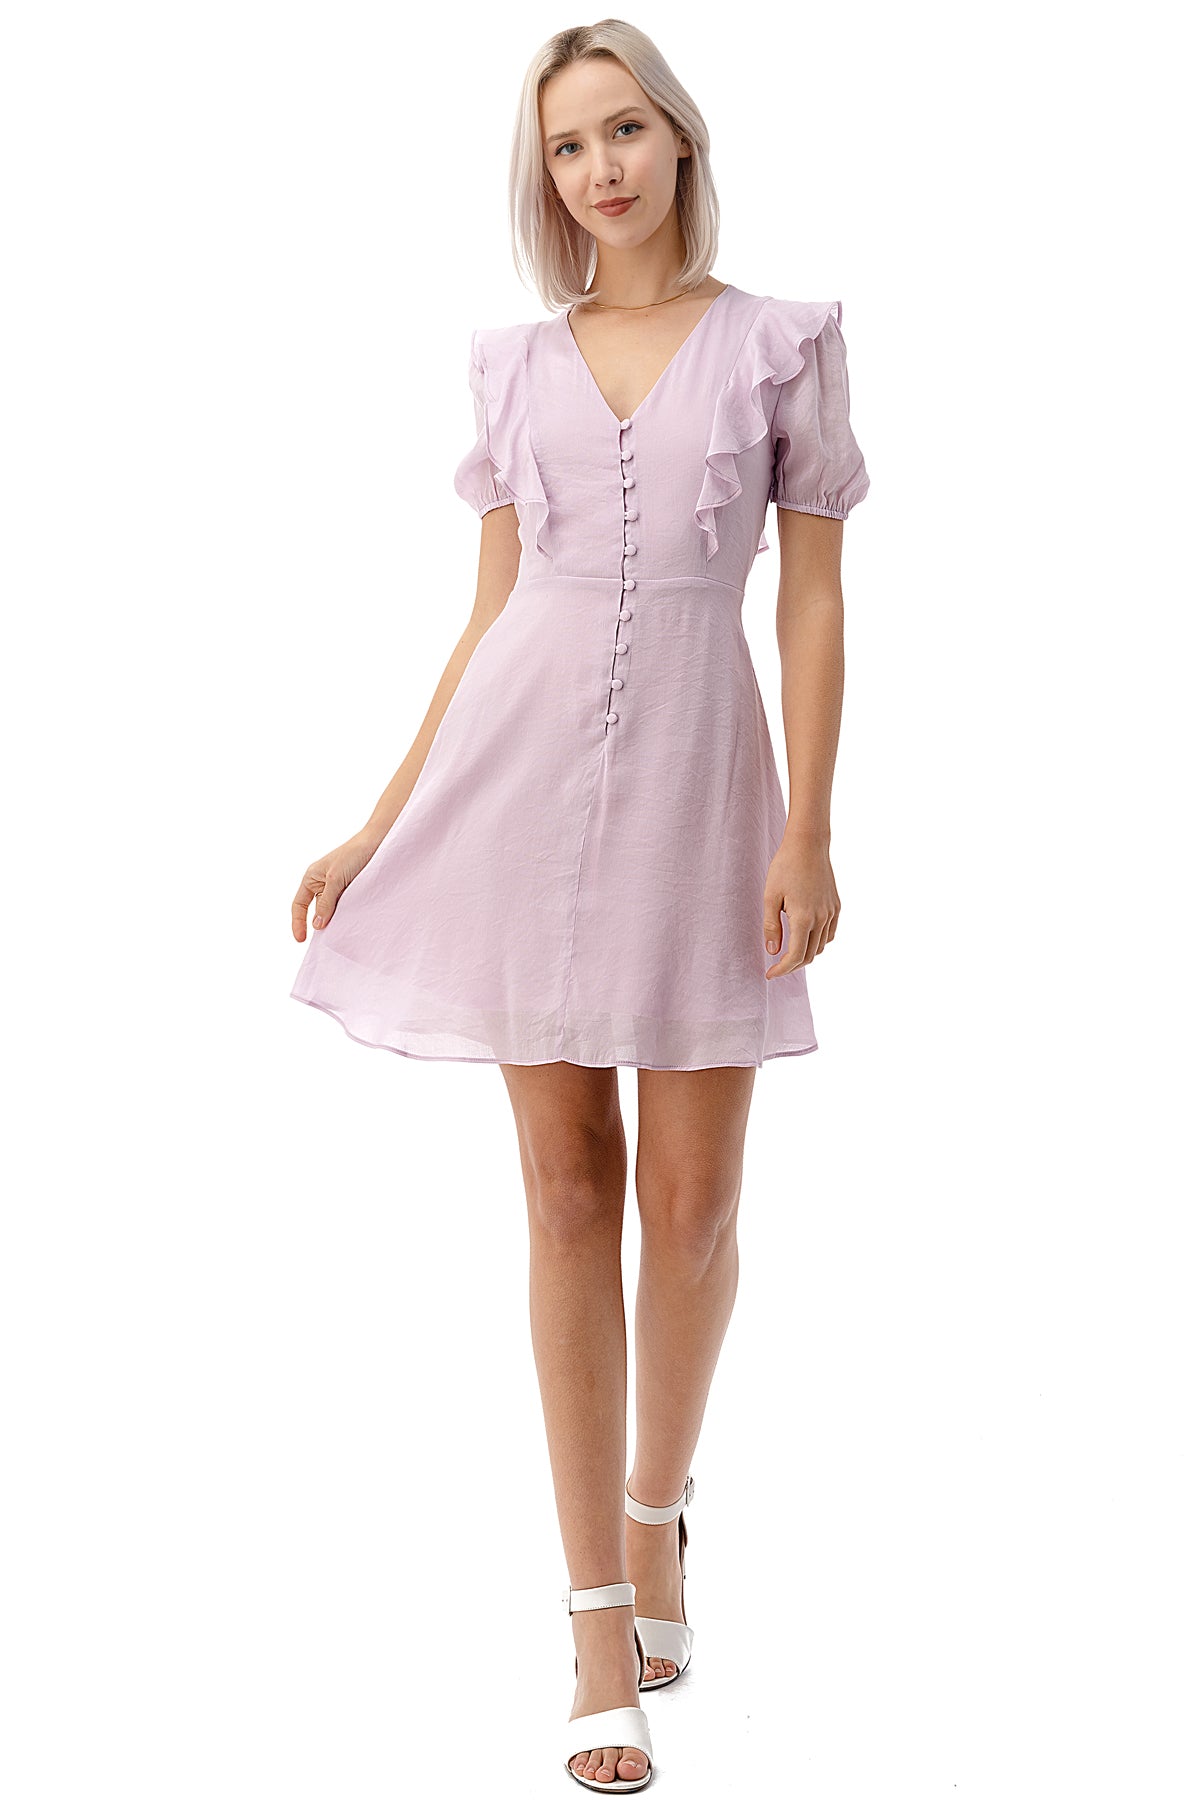 EDGY Land Girl's and Women's Button Down V-Neck Short Sleeve Ruffled Above-Knee A-Line Party Dress